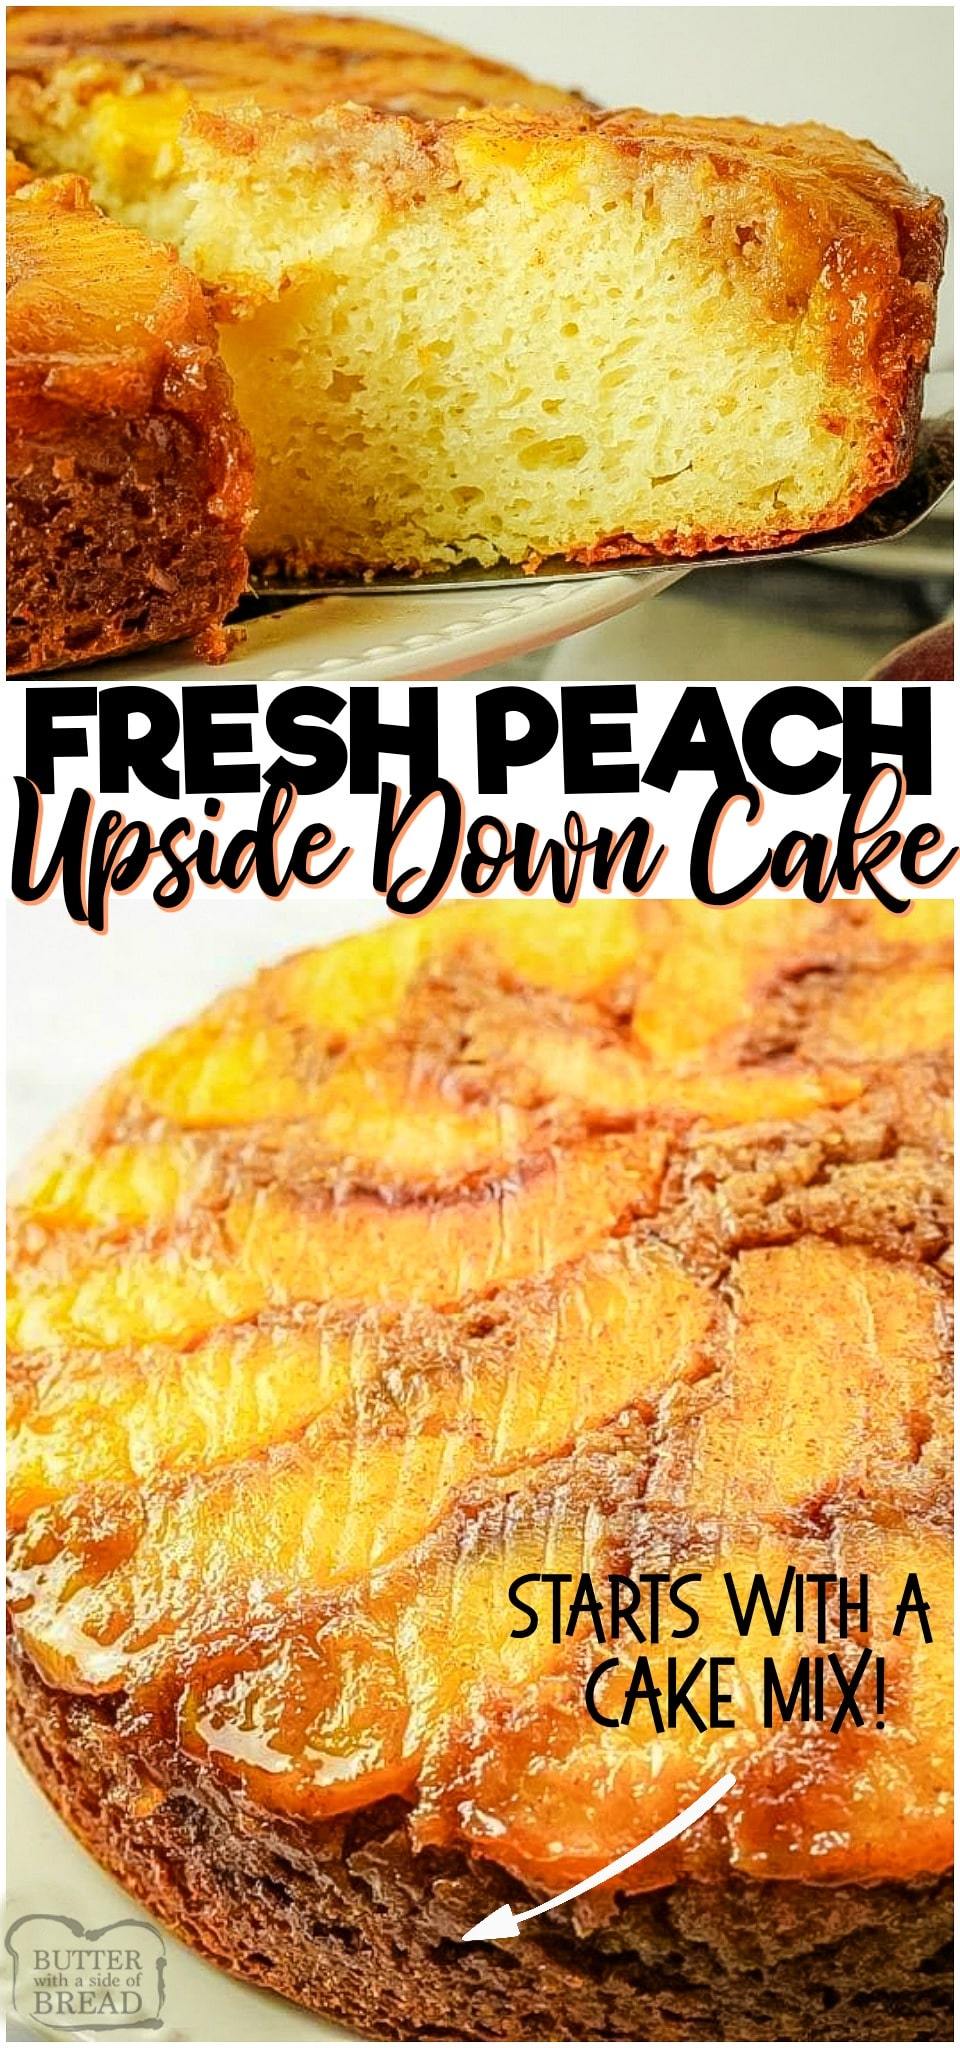 Peach Upside Down Cake is an amazing peach cake recipe with a handful of pantry ingredients + peaches!  This cake is the perfect way to enjoy fresh #peaches! #cake #upsidedown #peach #baking #dessert #upsidedowncake #recipe from BUTTER WITH A SIDE OF BREAD